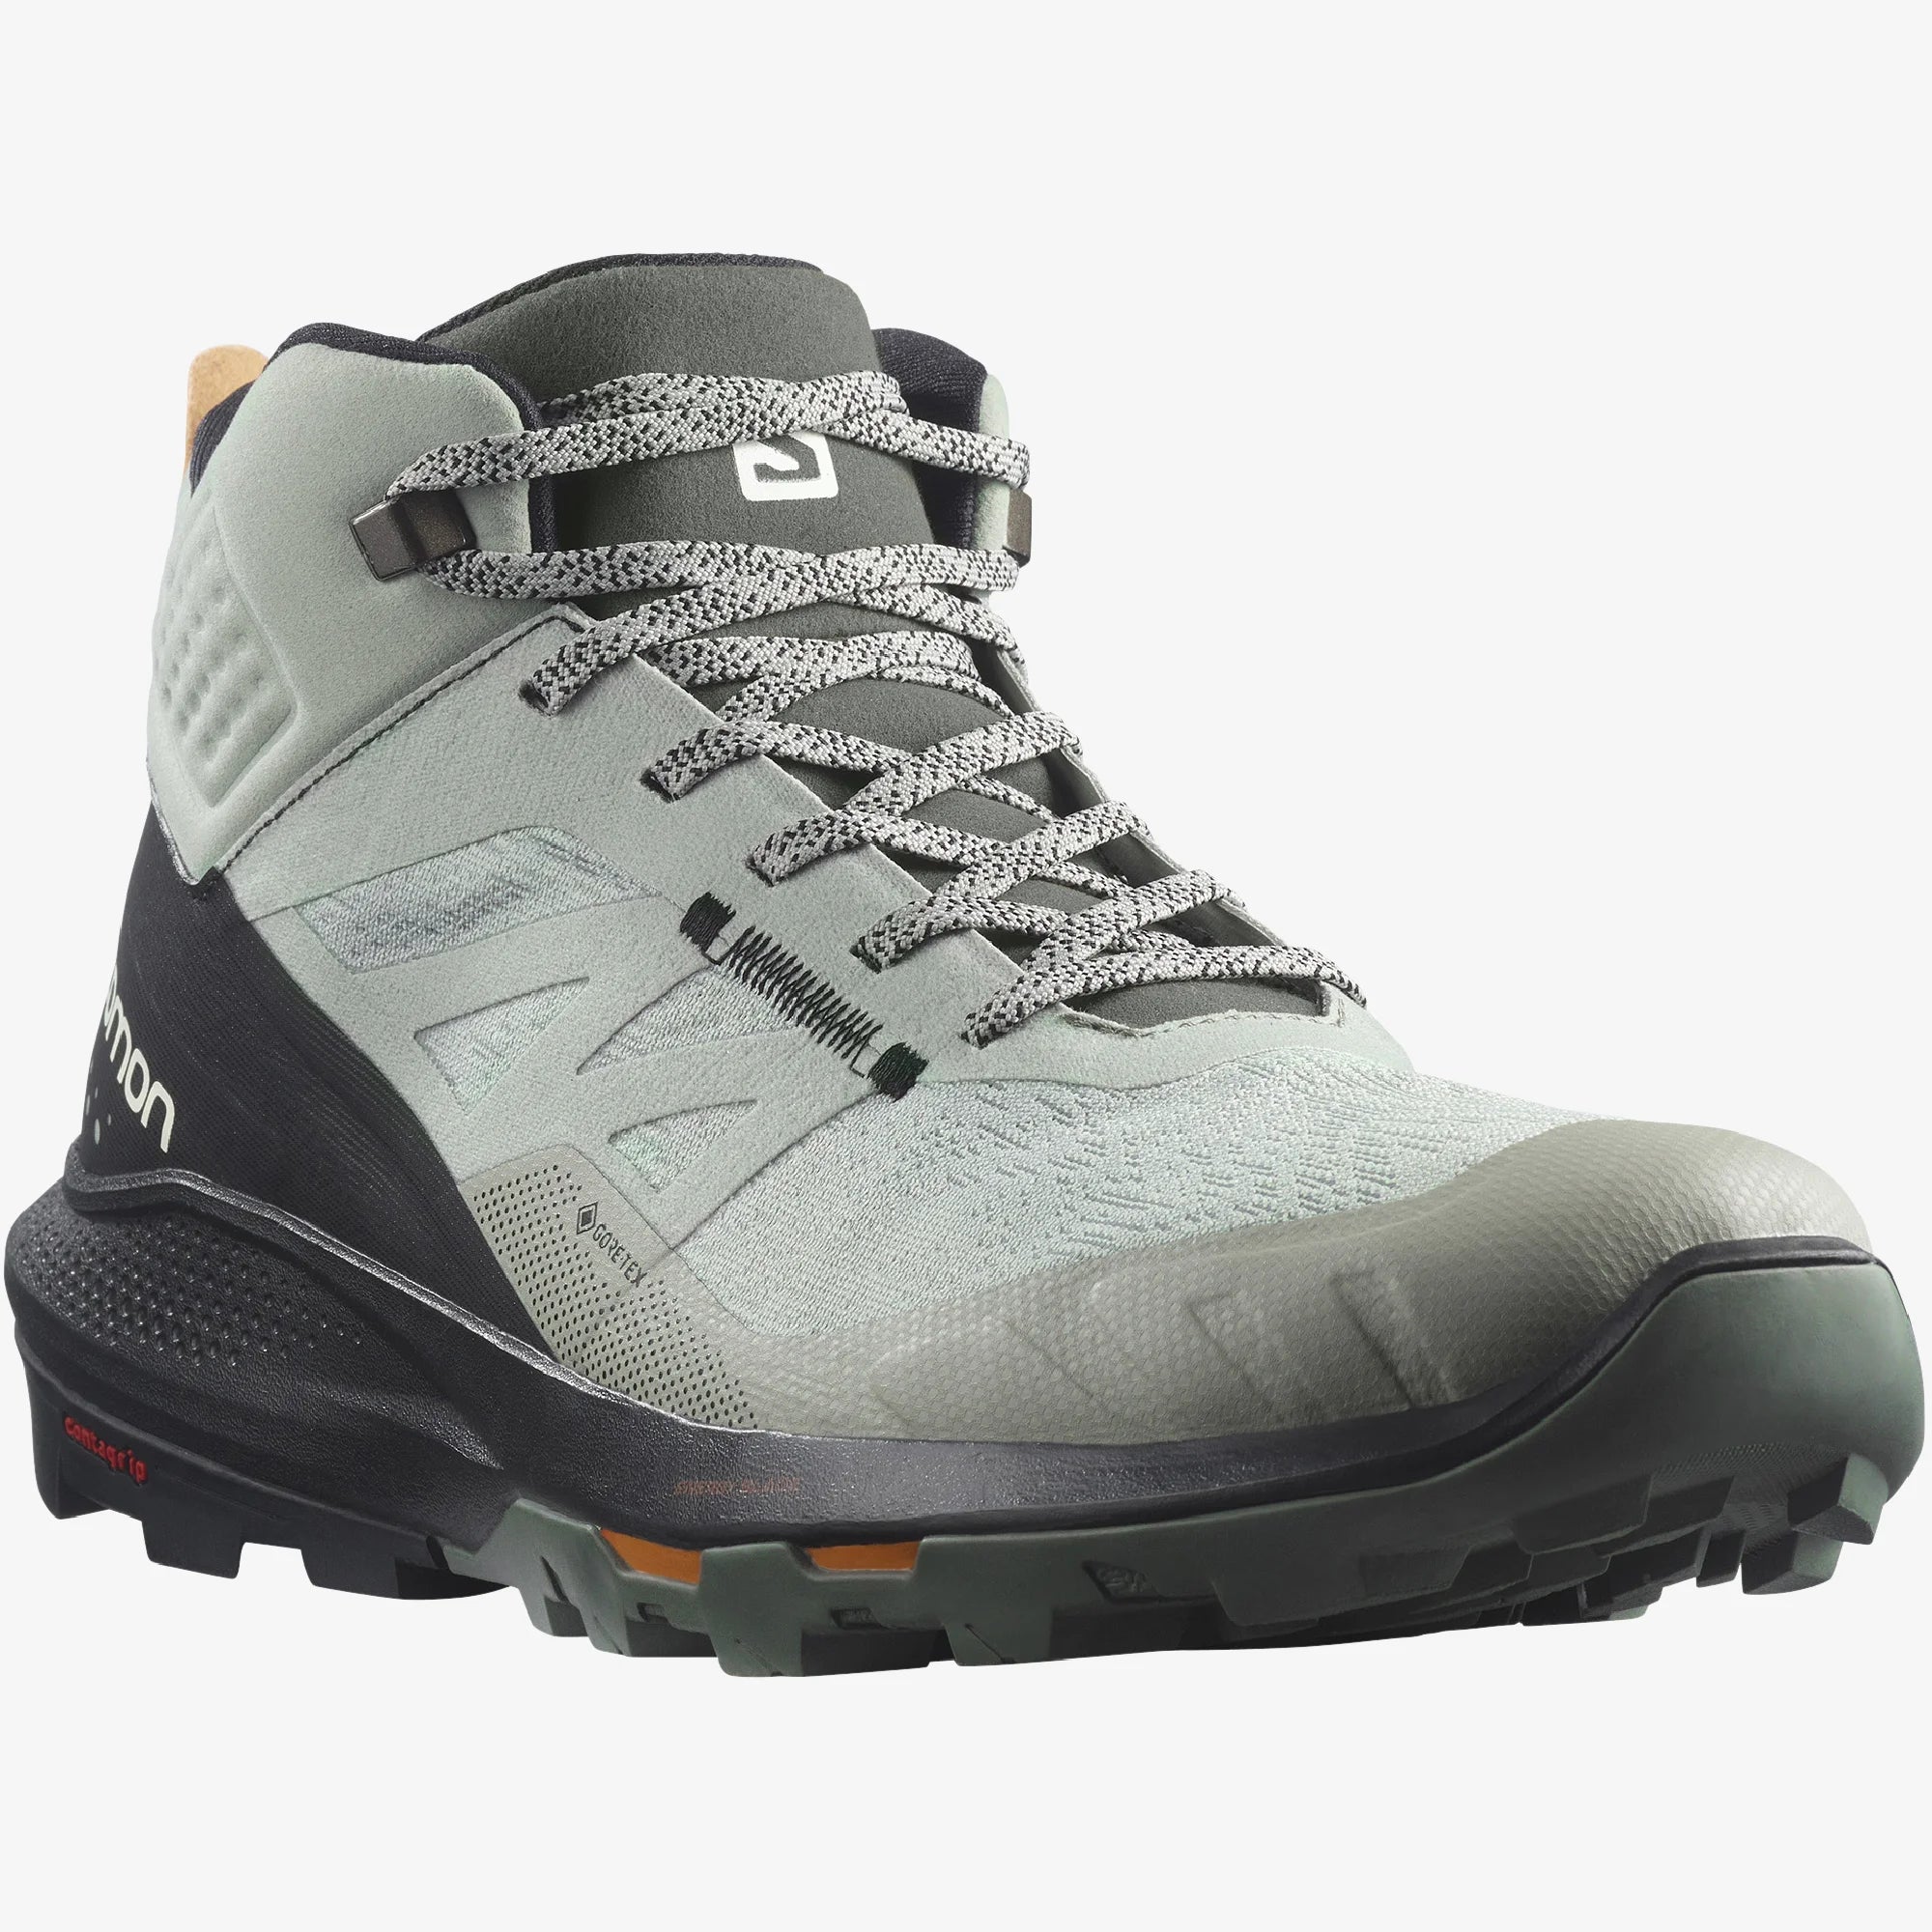 Outpulse Gore-Tex Hiking Shoes - Men's - Tides, and